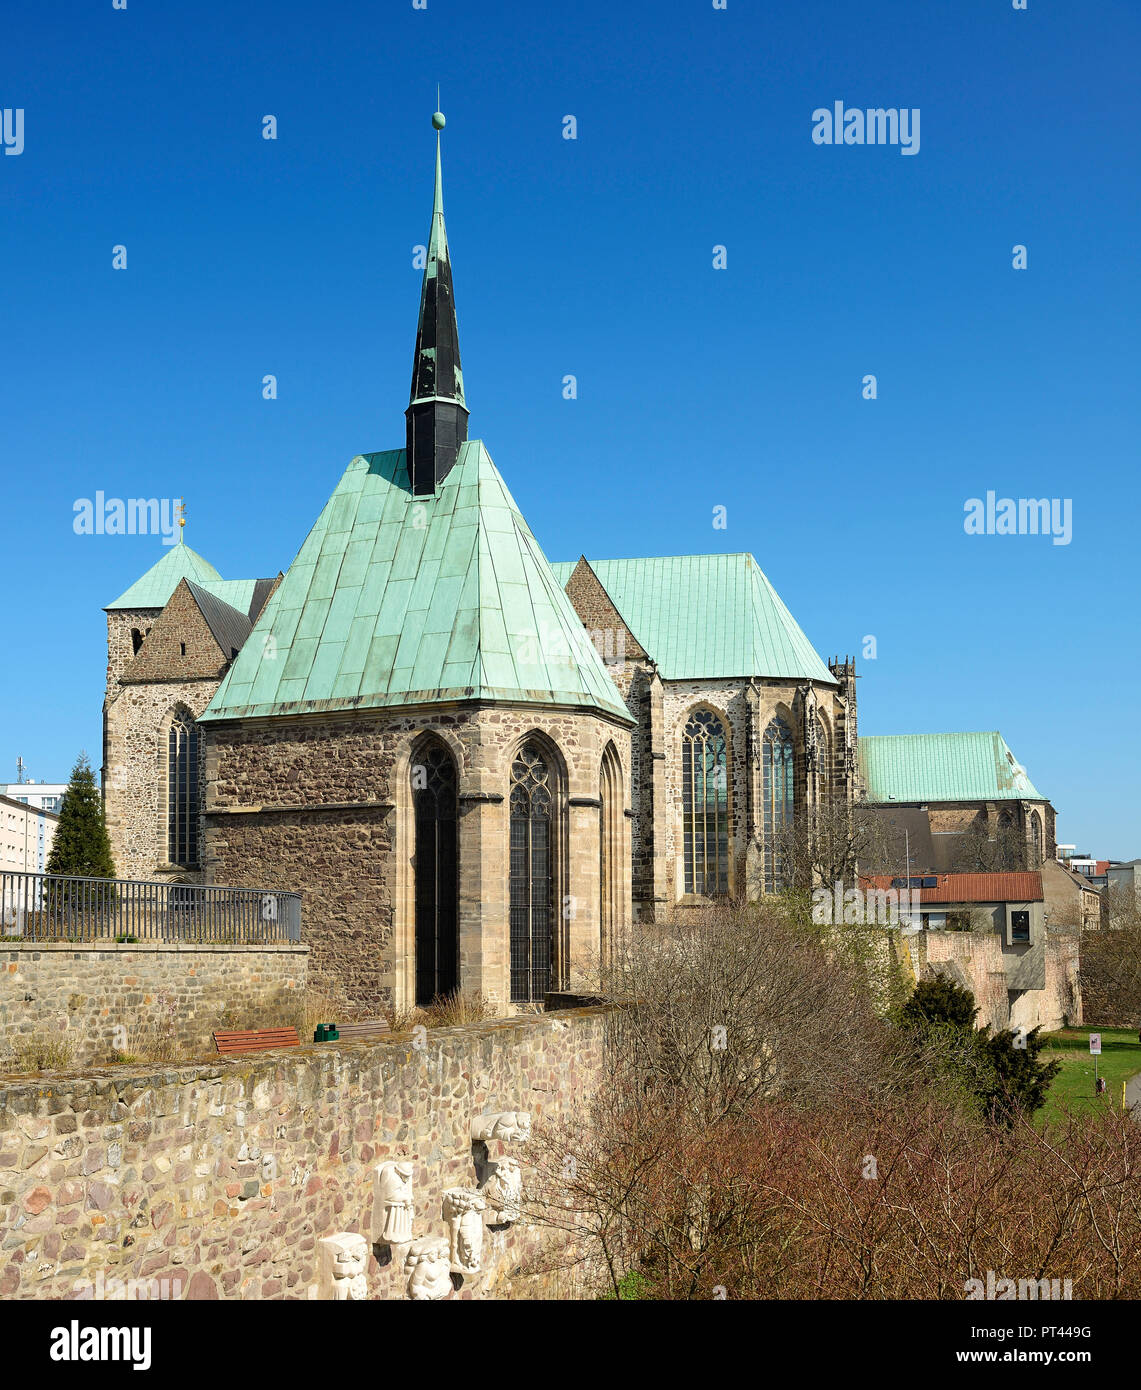 Germany, Saxony-Anhalt, Magdeburg, Gothic architecture, Magdalenenkapelle, Petrikirche and Wallonerkirche near the city wall Stock Photo